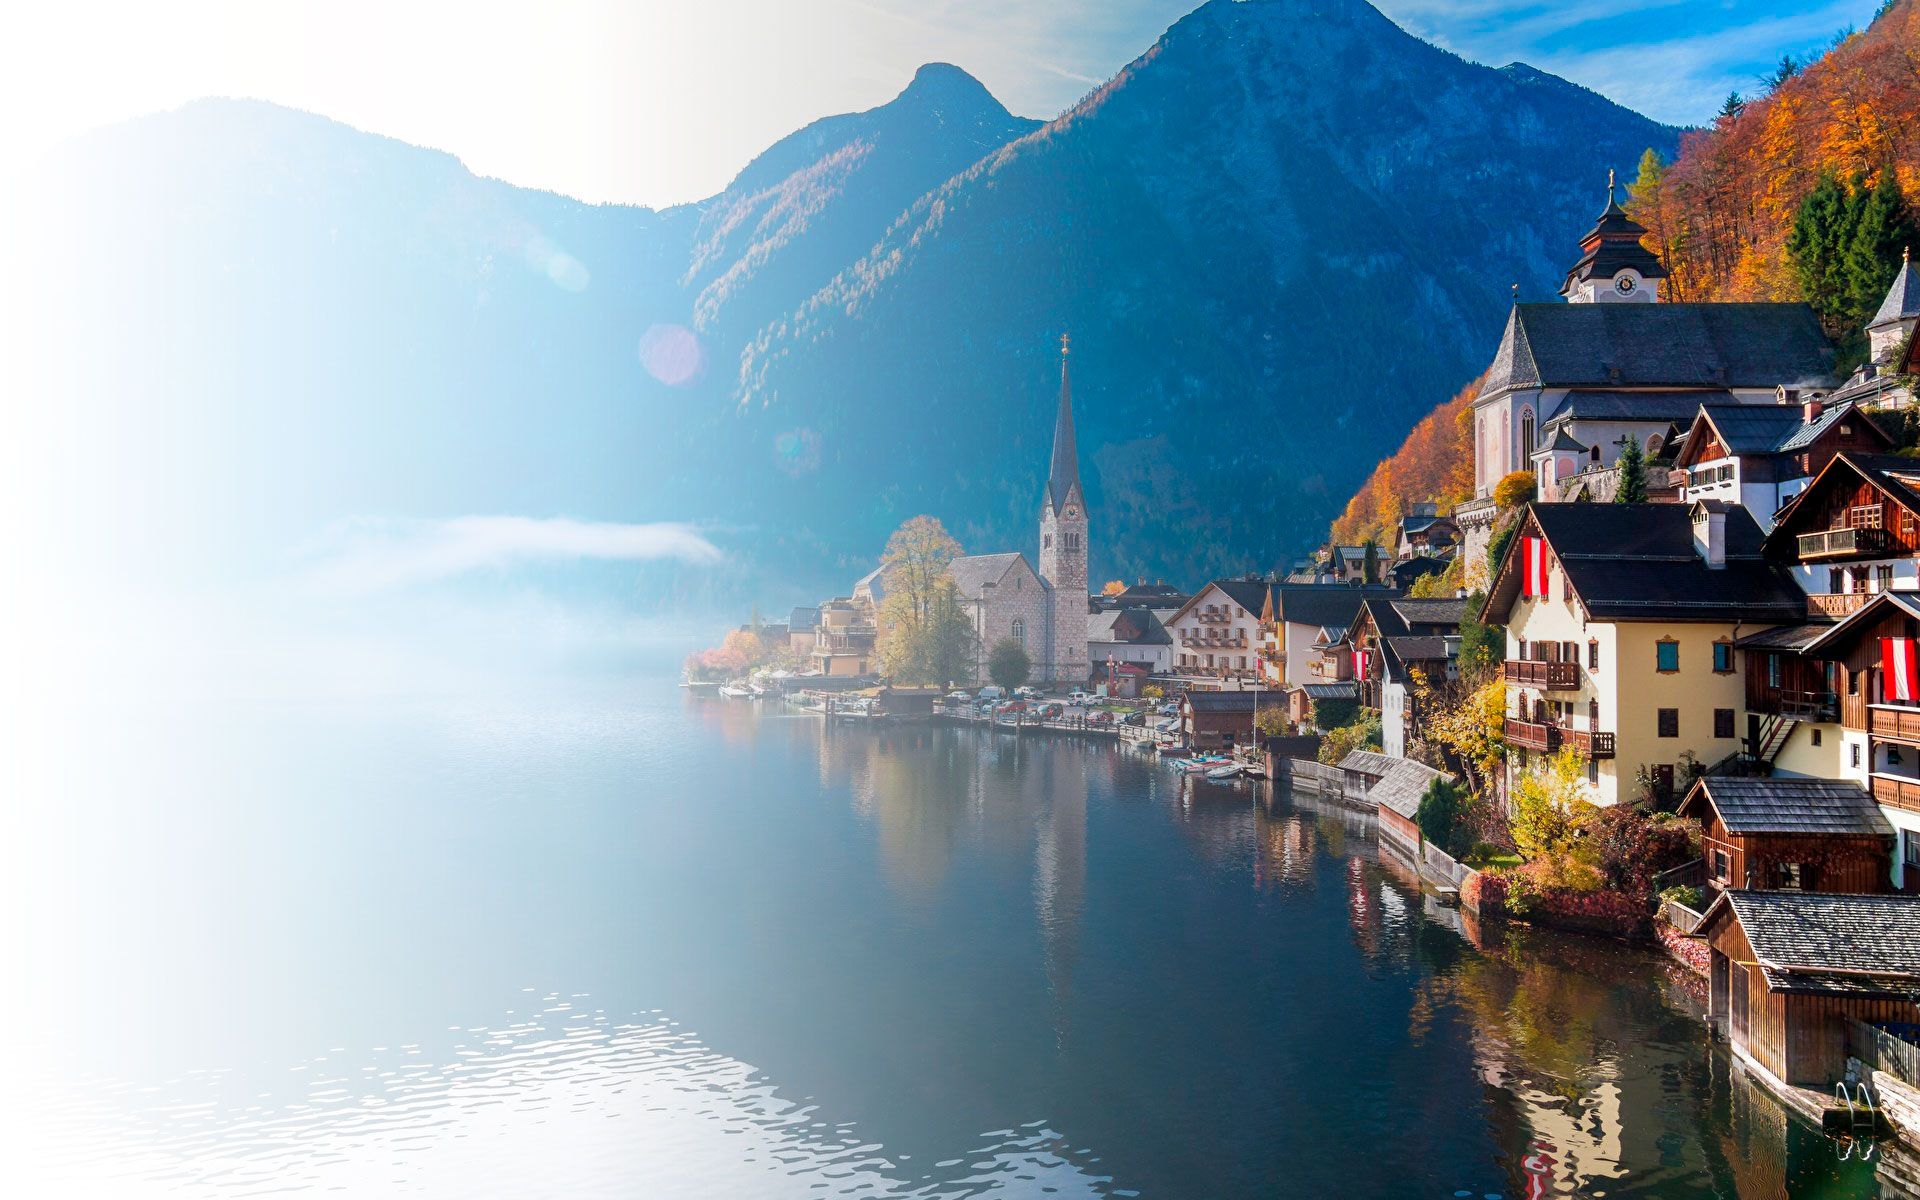 Get a residence permit in Switzerland